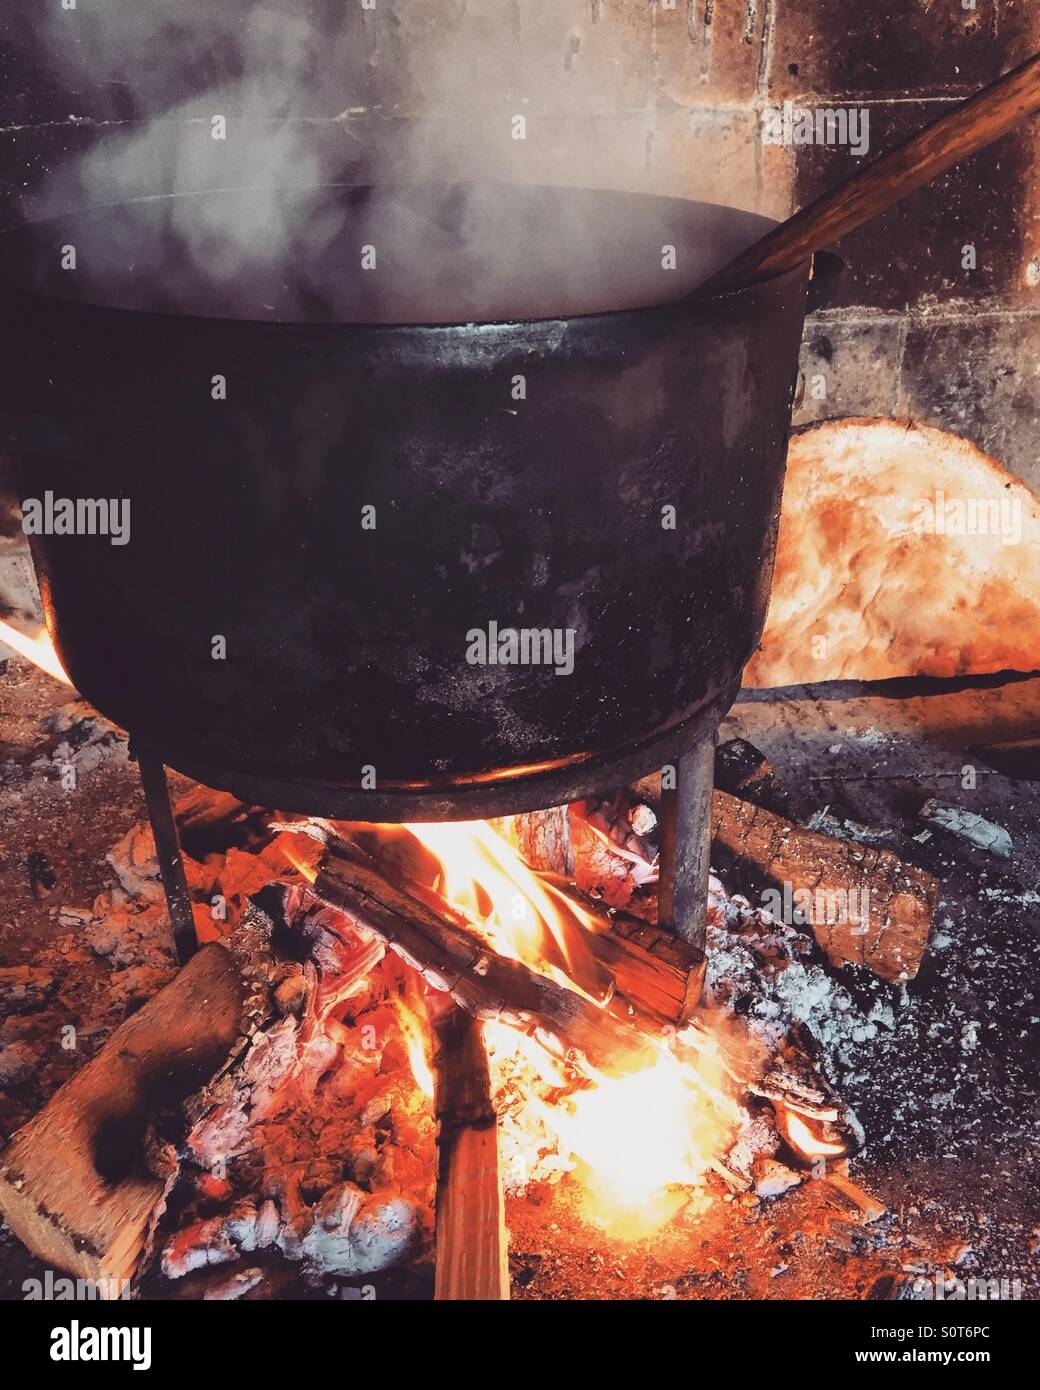 Cooking in old pot over fire Stock Photo